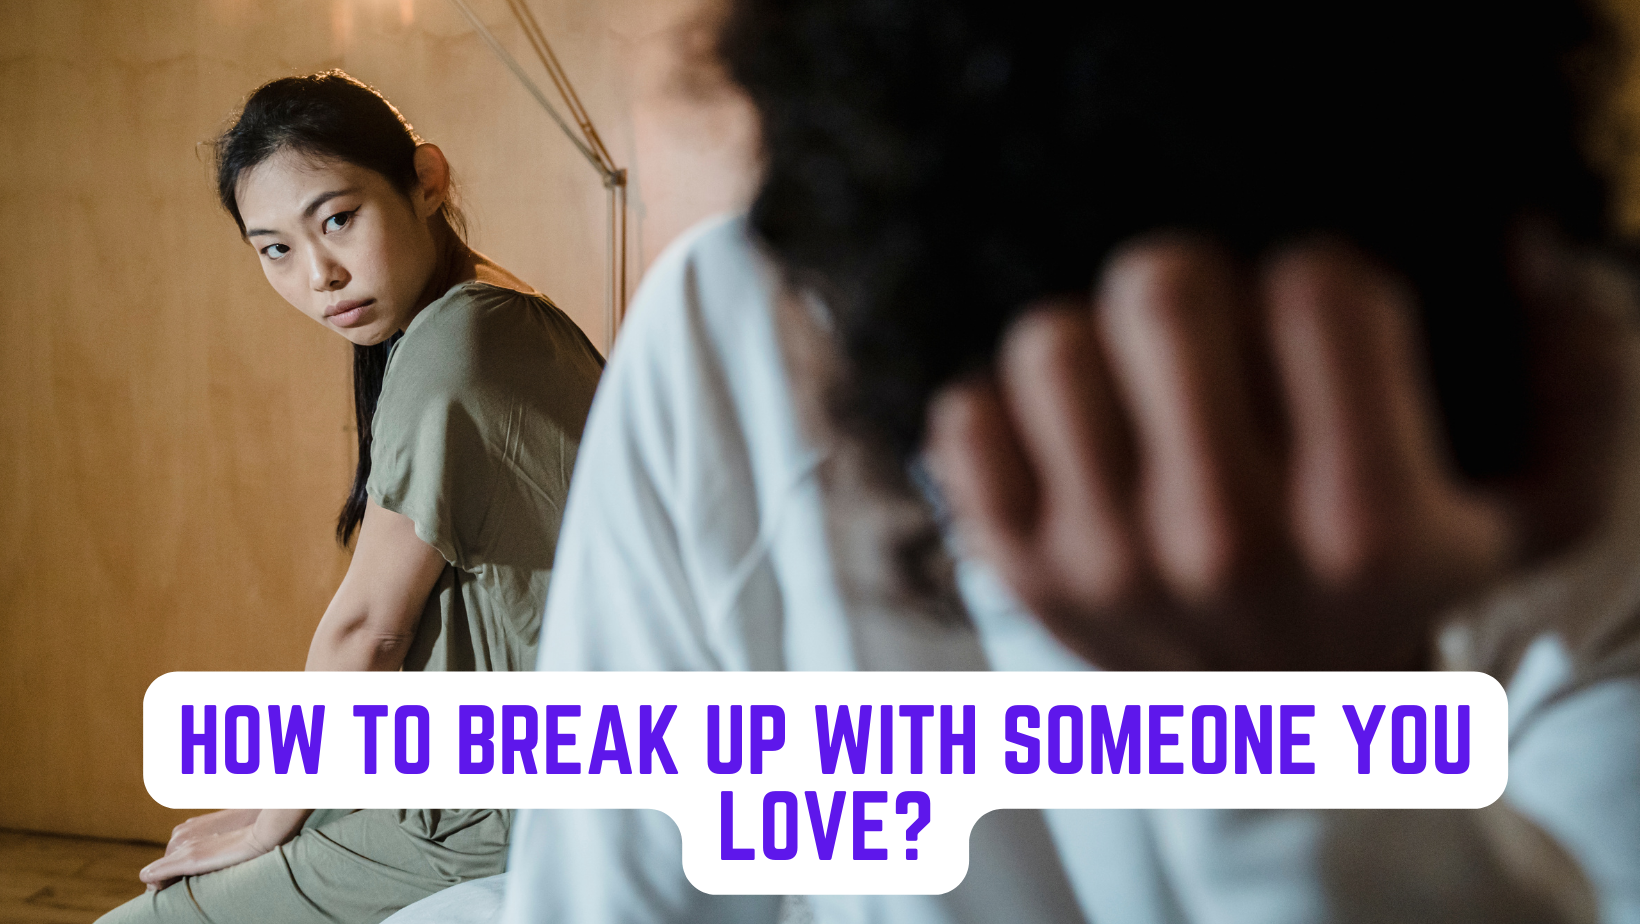 How to Break Up with Someone You Love?